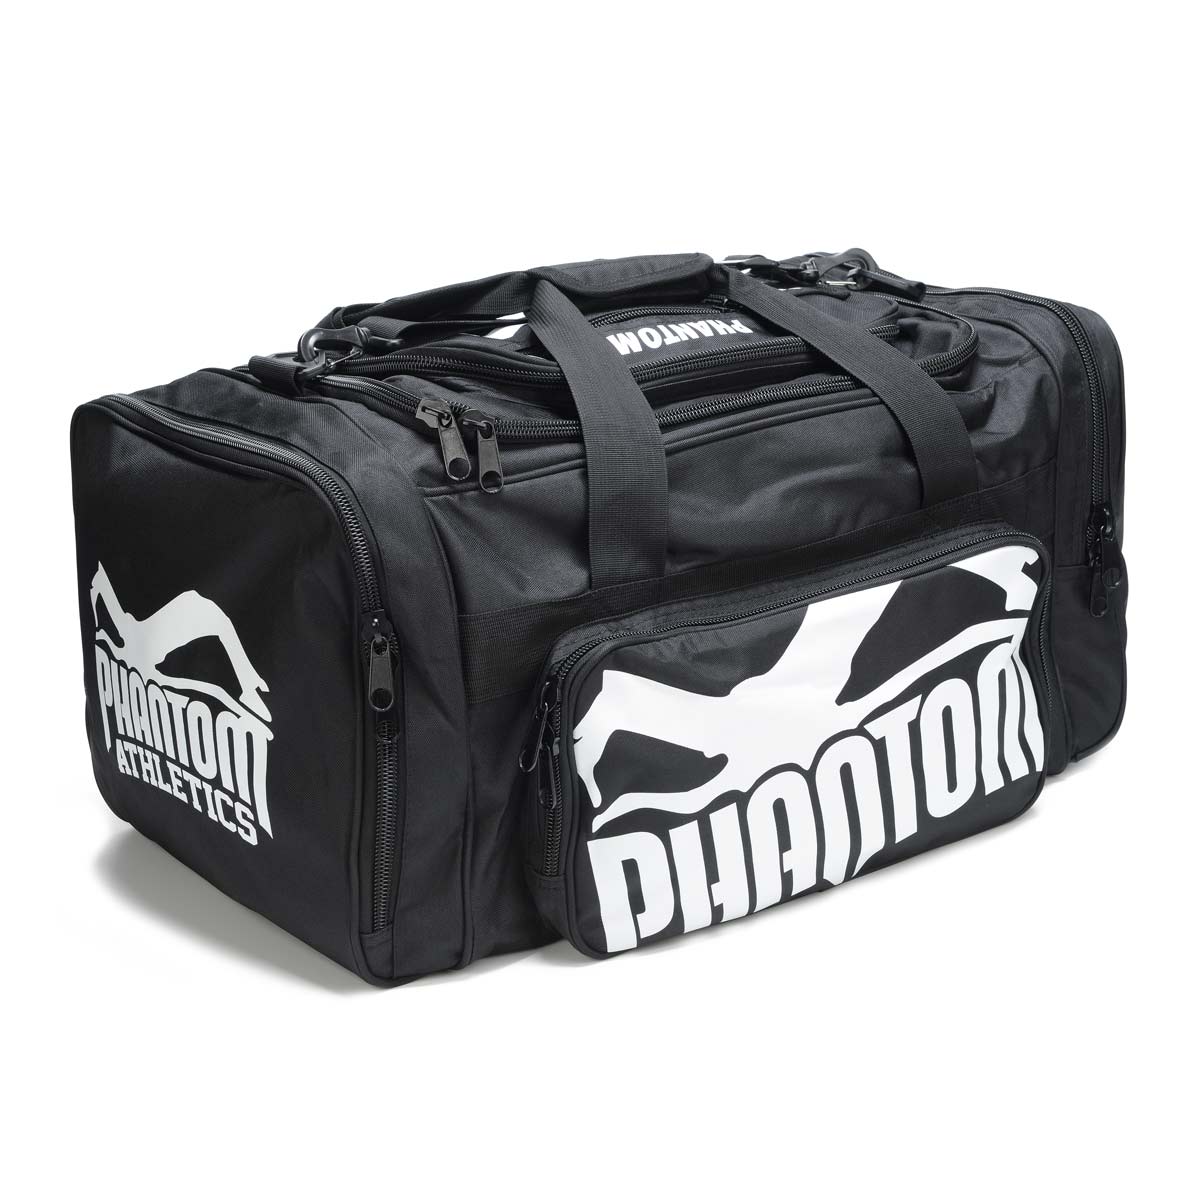 The Phantom training bag Team with plenty of storage space for your martial arts equipment